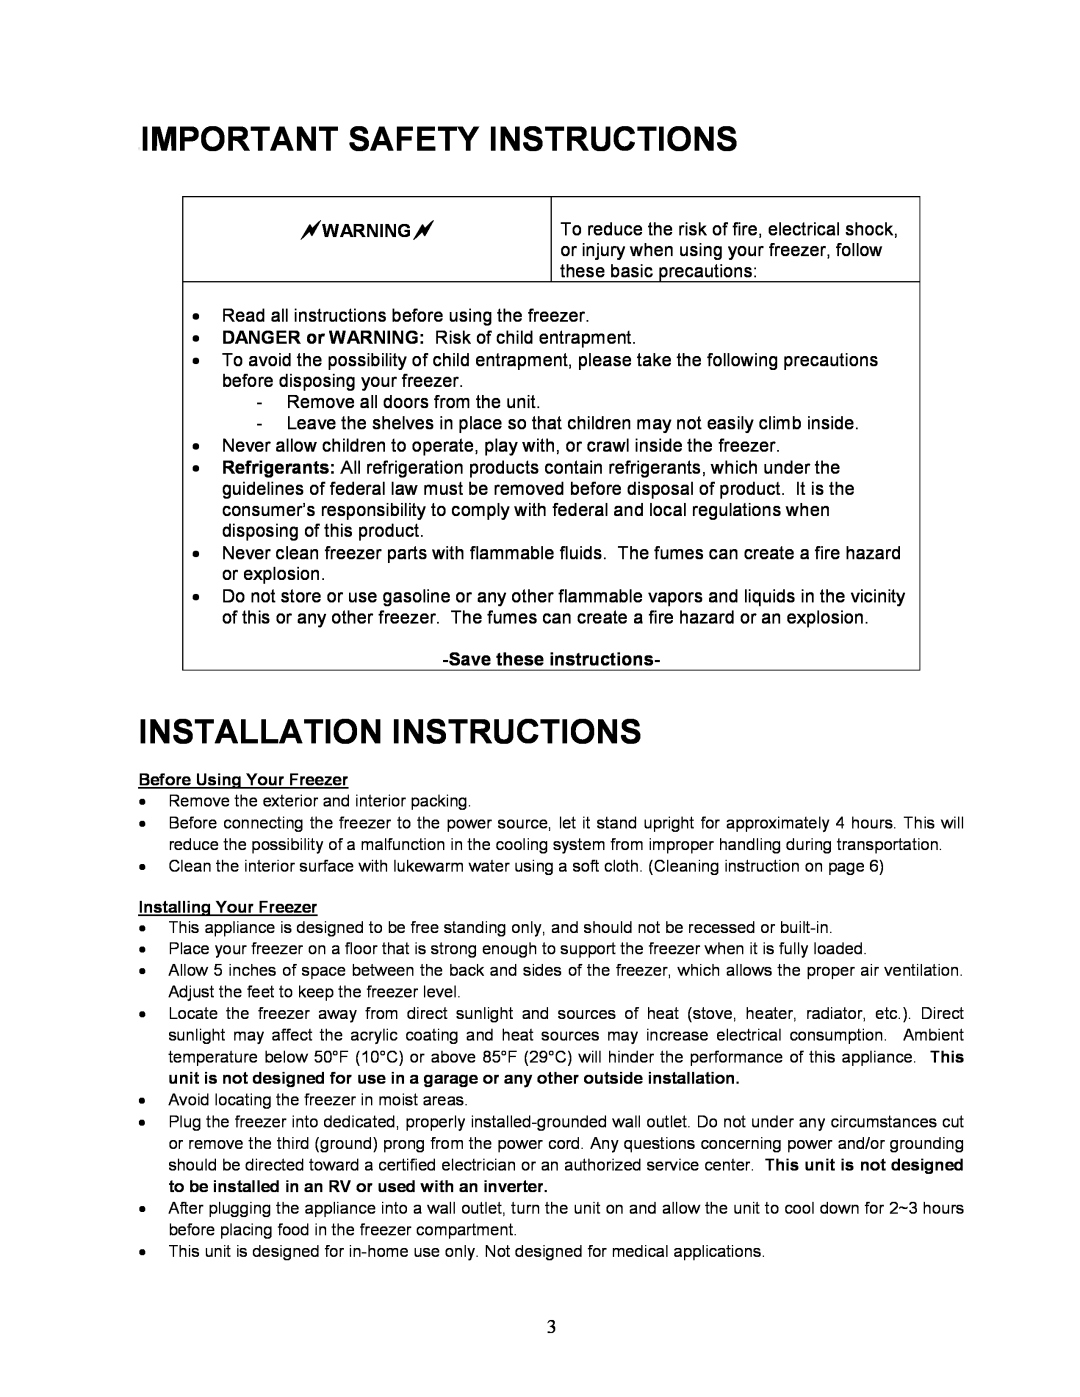 Magic Chef MCUF88W instruction manual Important Safety Instructions, Installation Instructions, Savethese instructions 